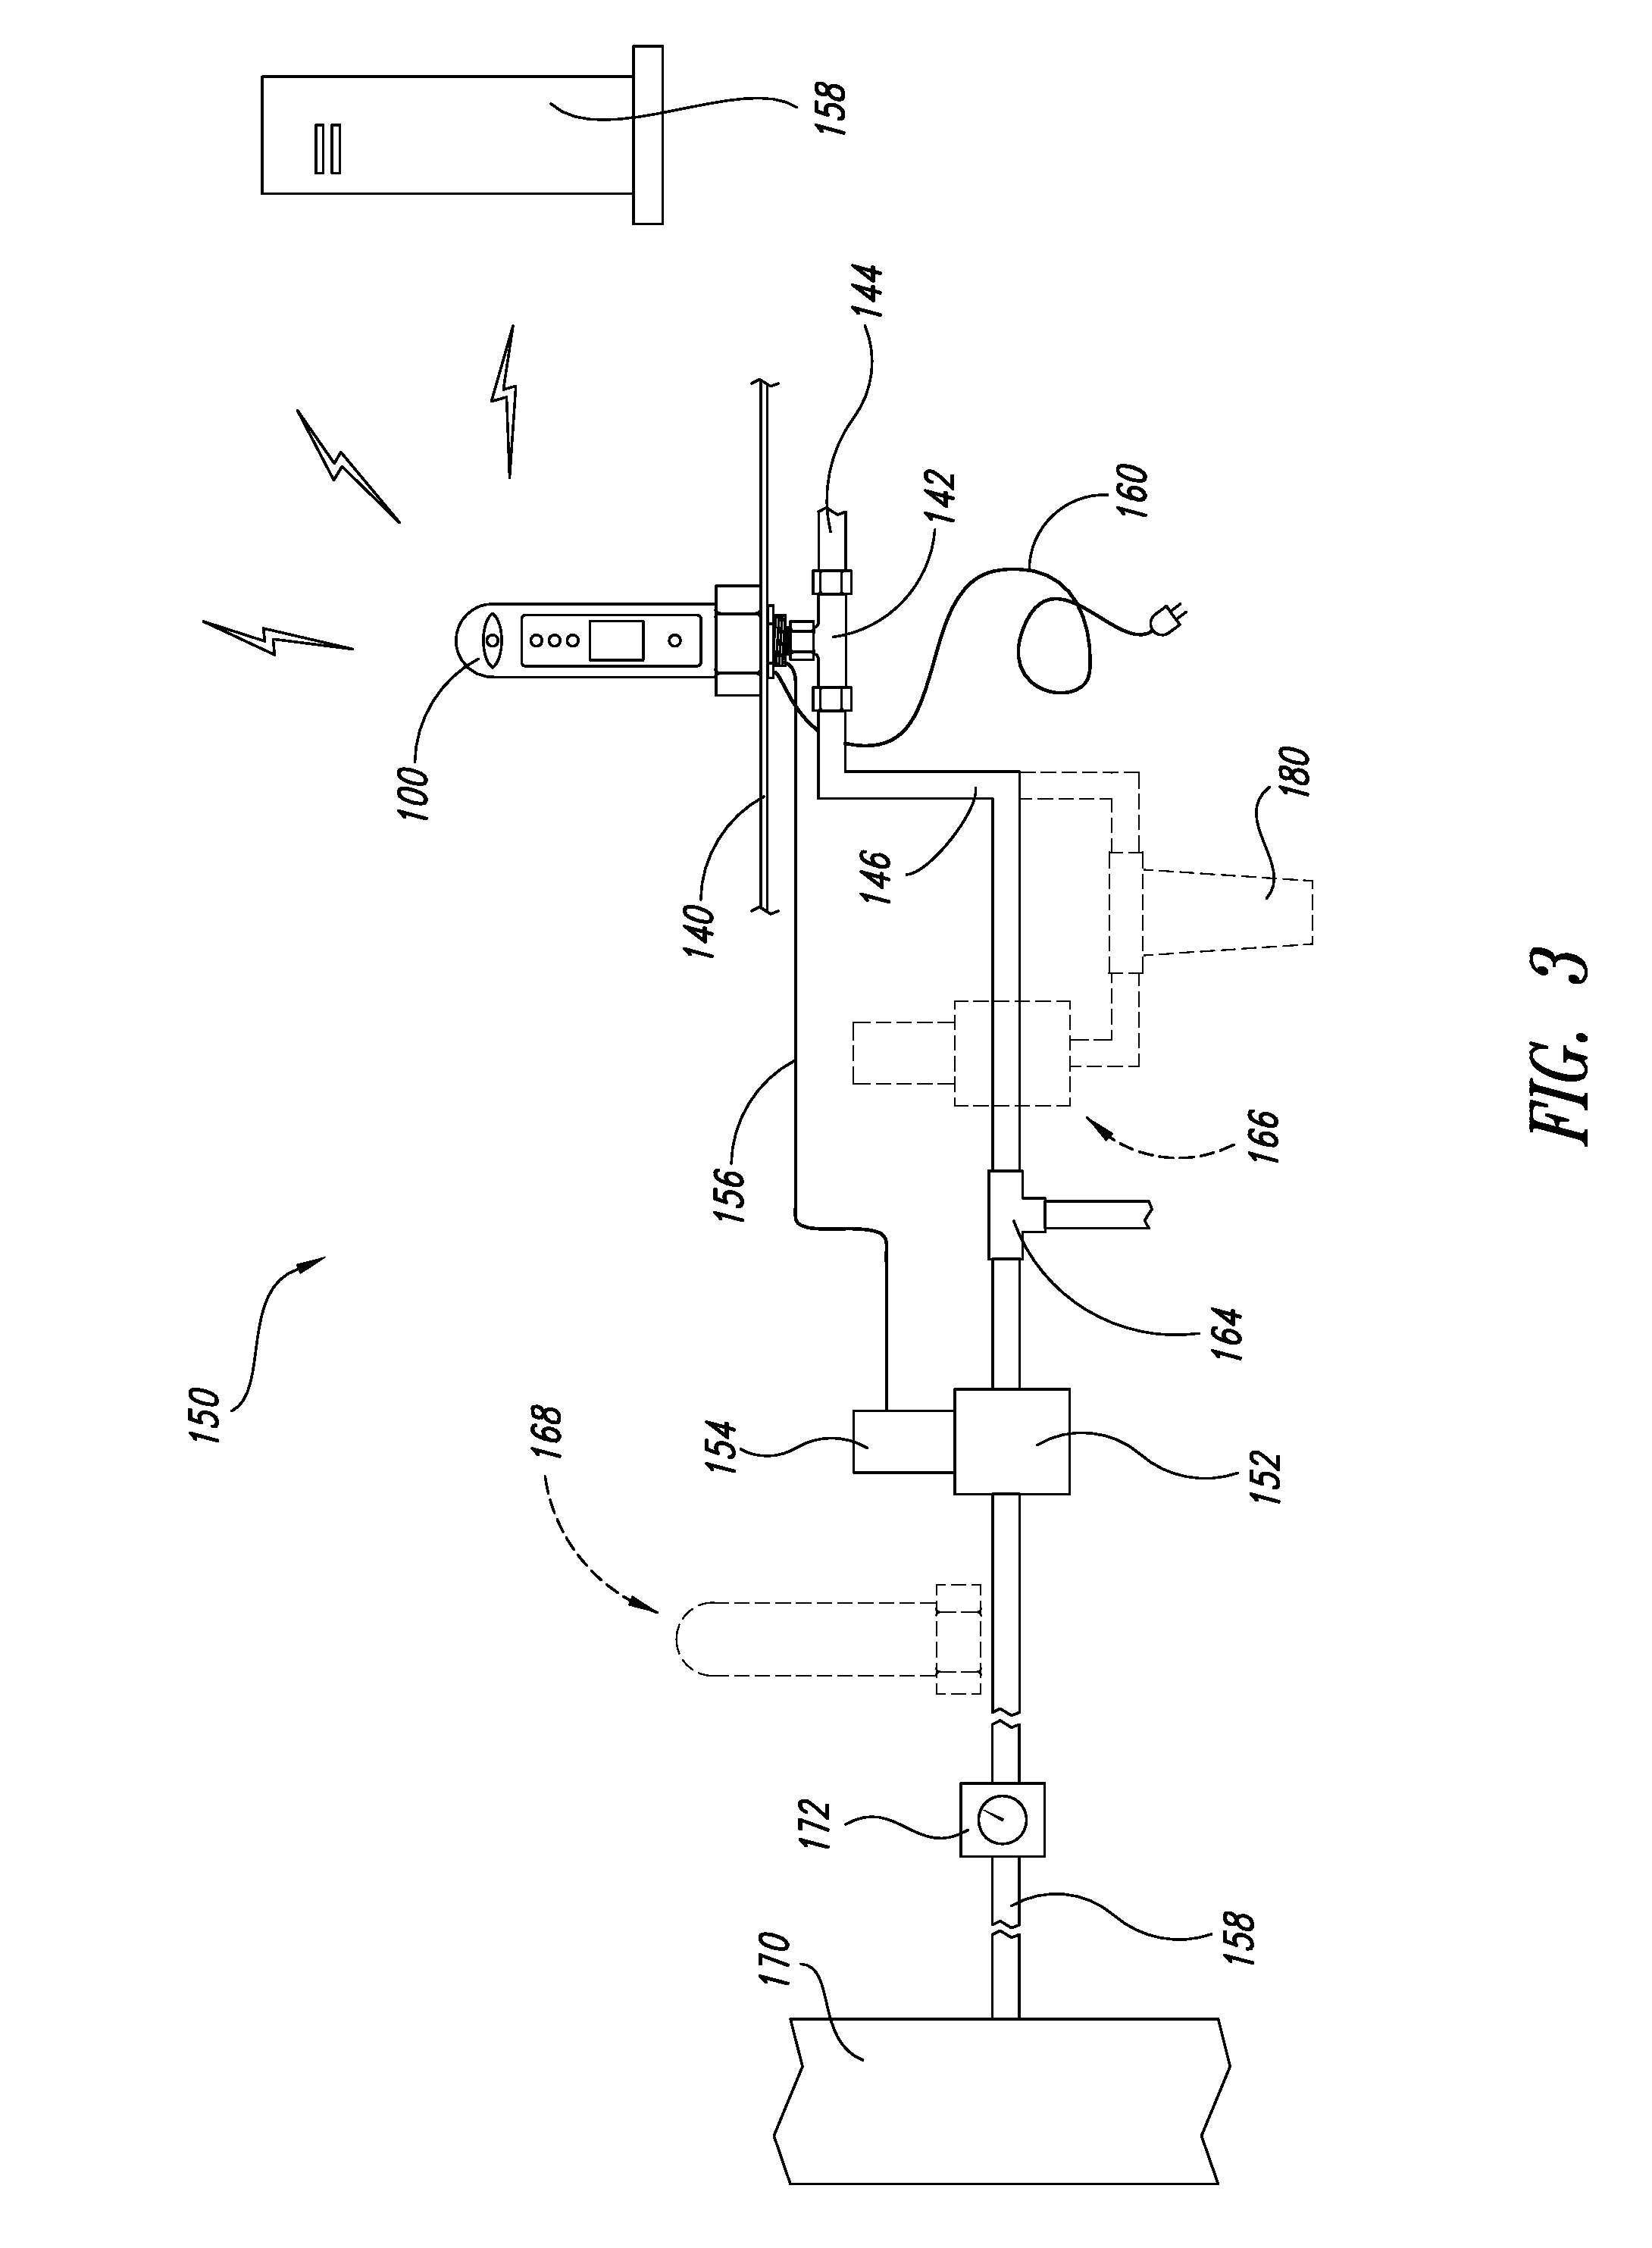 Water quality monitoring device and method